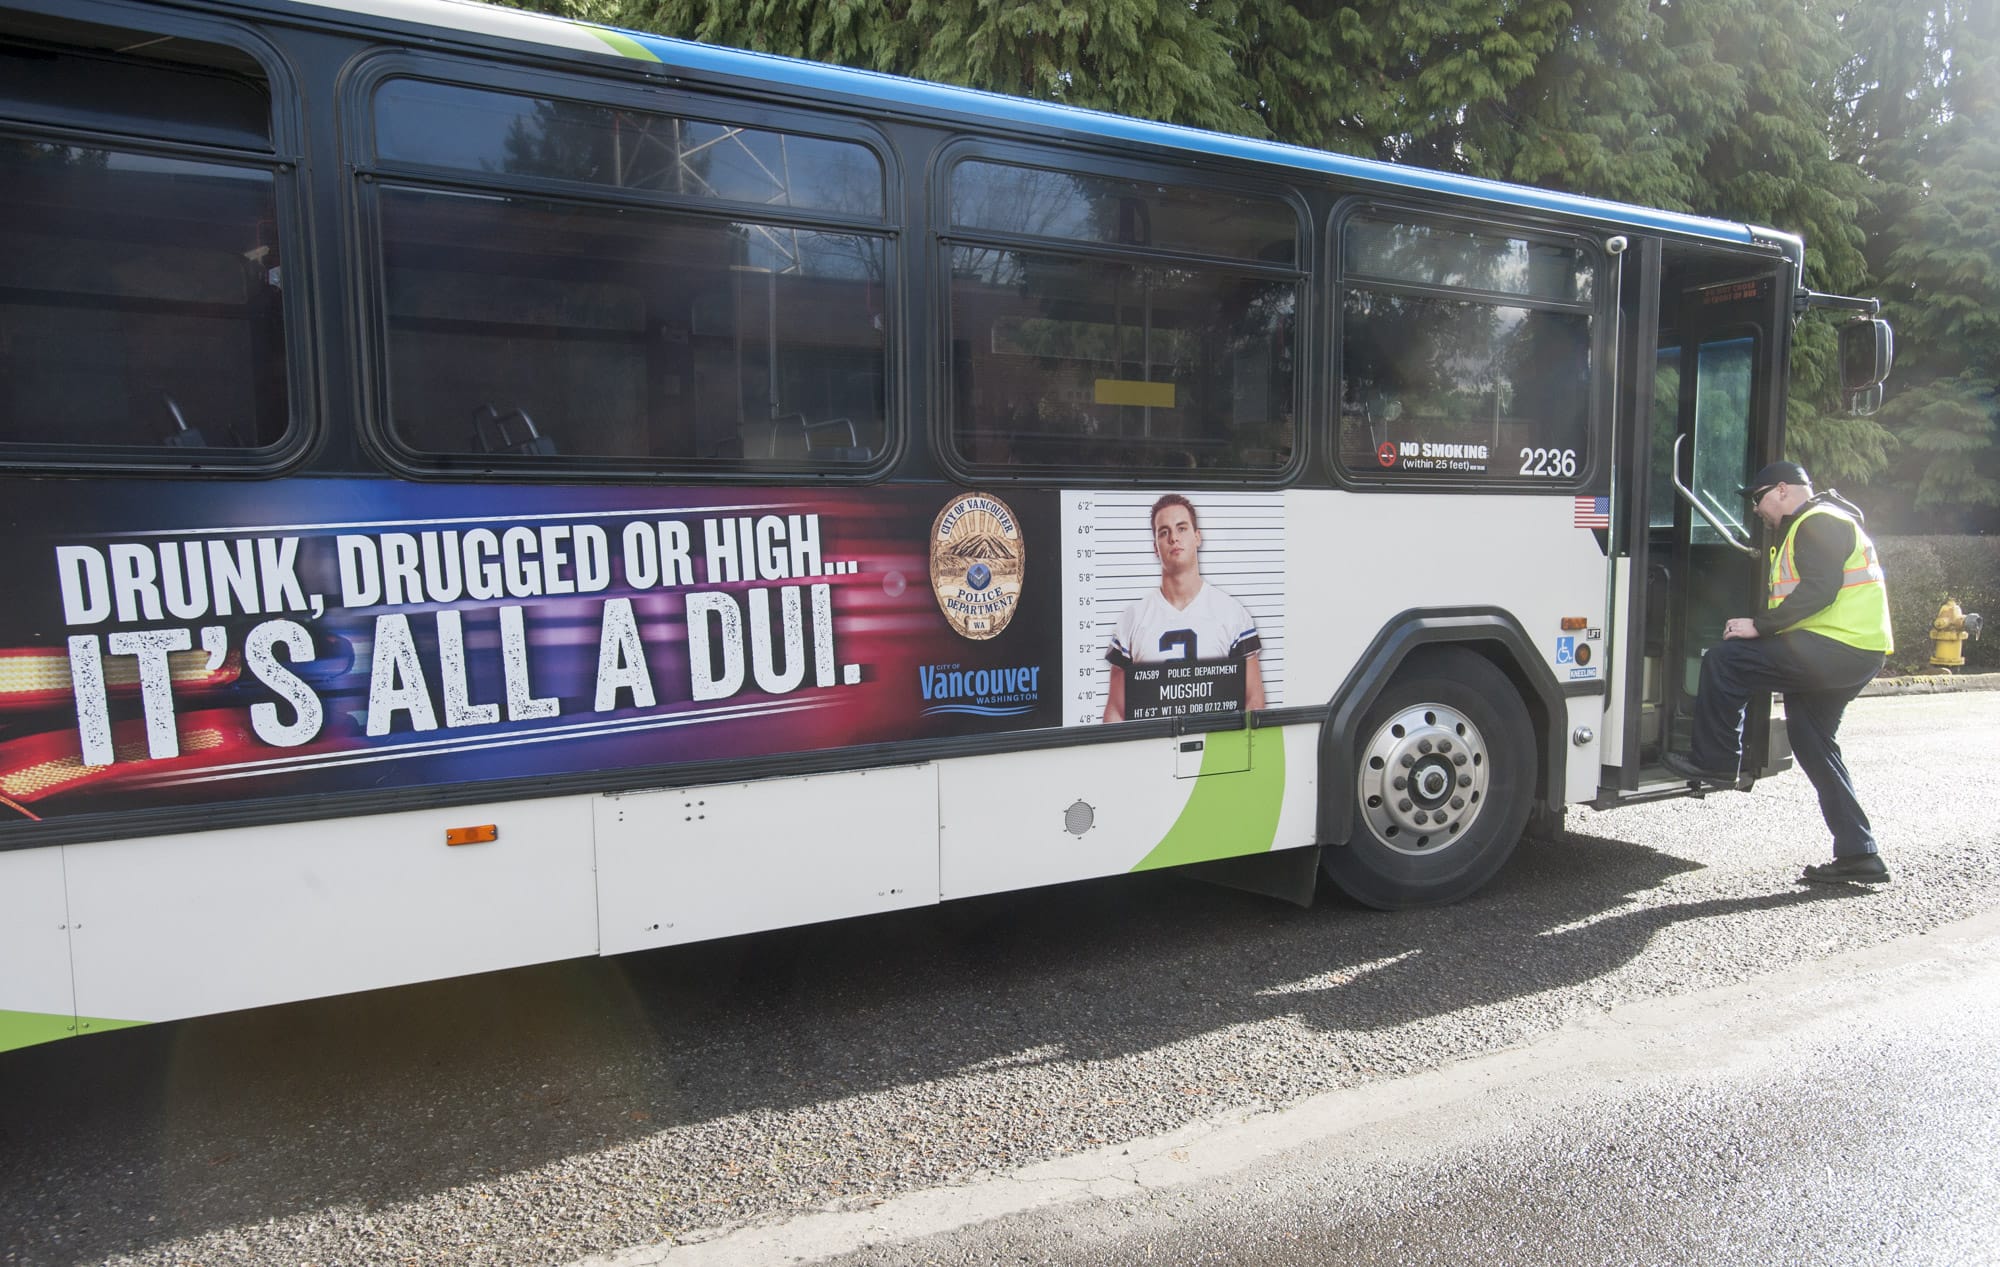 A bus with an ad warning people not to drive drunk or high is seen on the side of a C-Tran bus in Vancouver in January 2016. The Vancouver Police Department had received $150,000 from the state to combat DUIs. "By 2016, the number of poly-drug drivers were more than double the number of alcohol-only drivers and five times higher than the number of THC-only drivers involved in fatal crashes," authors of a just-released Washington Traffic Safety Commission study on impaired driving from 2008 to 2016 wrote.